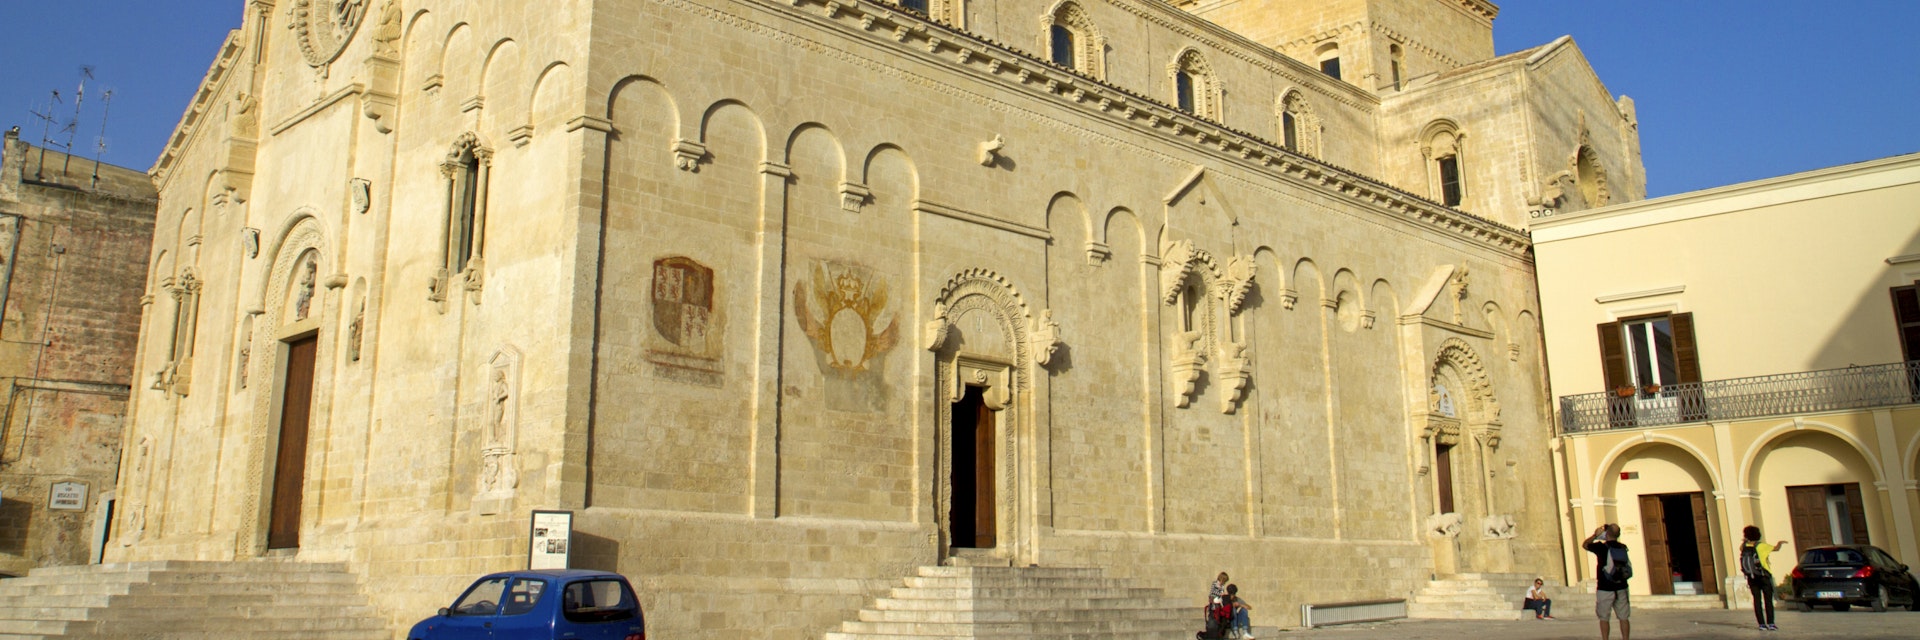 The main cathedral of the Italian city of Matera